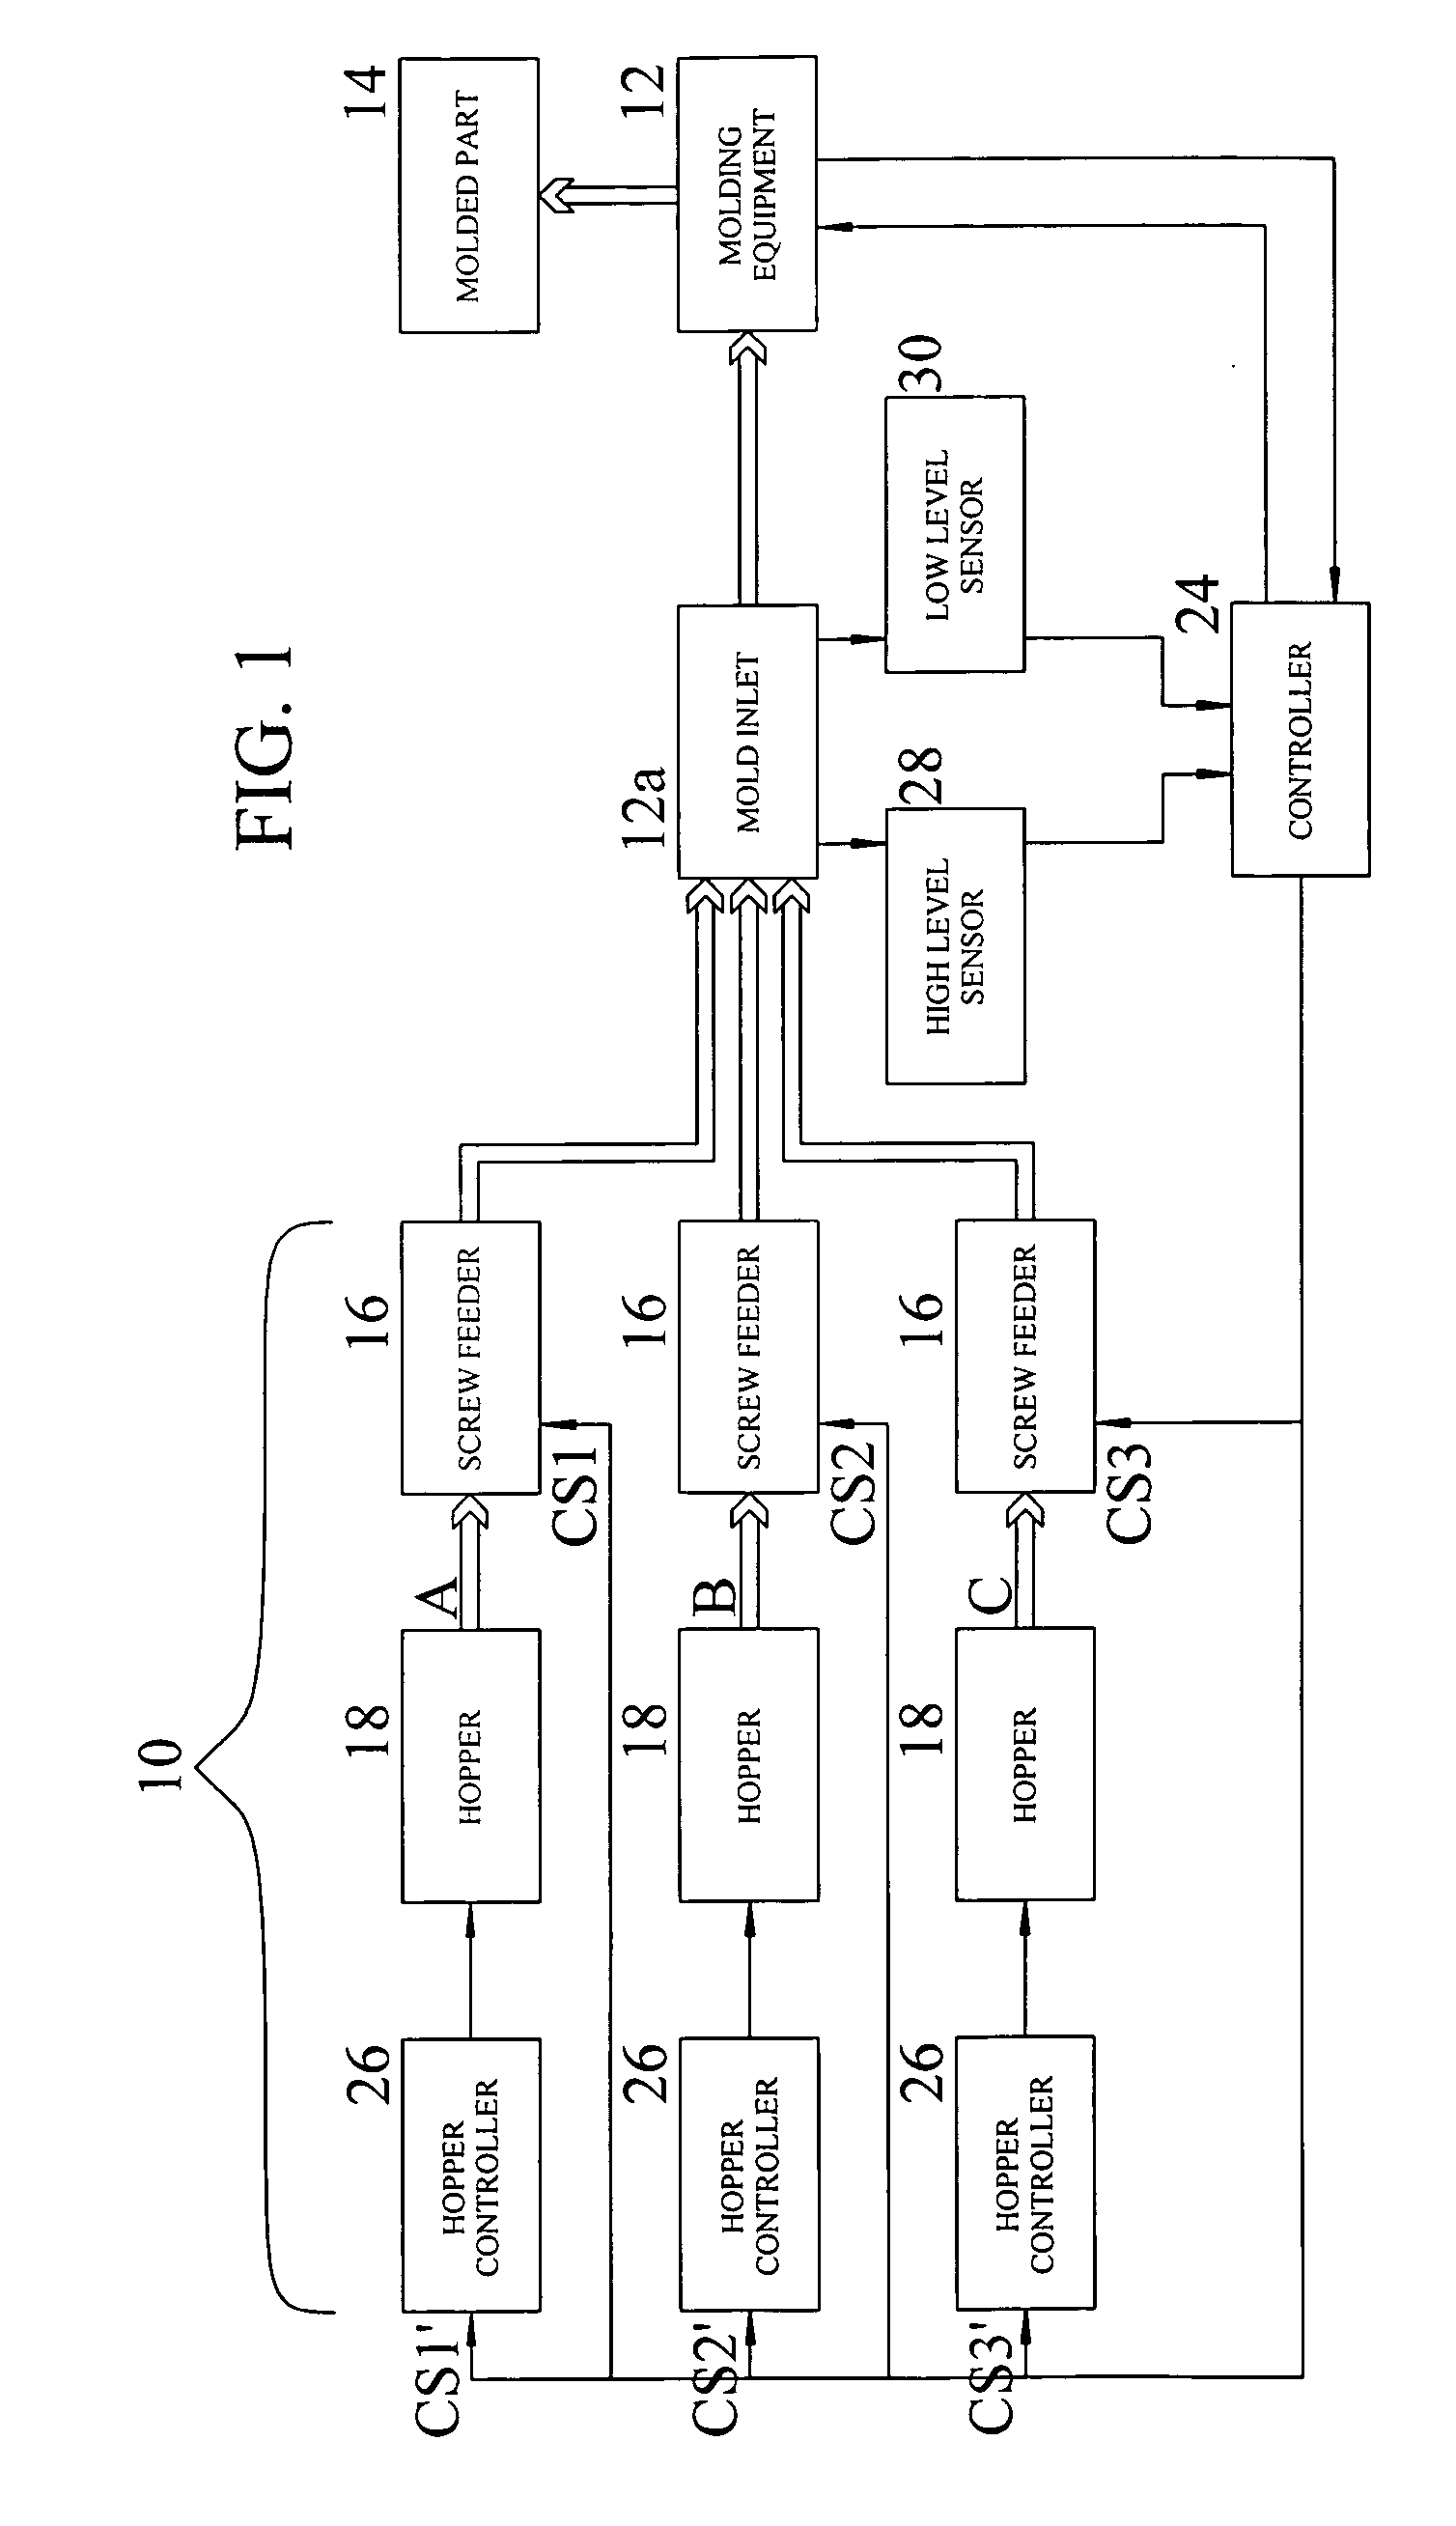 Color variation control process for molding plastic and composite multi-color articles